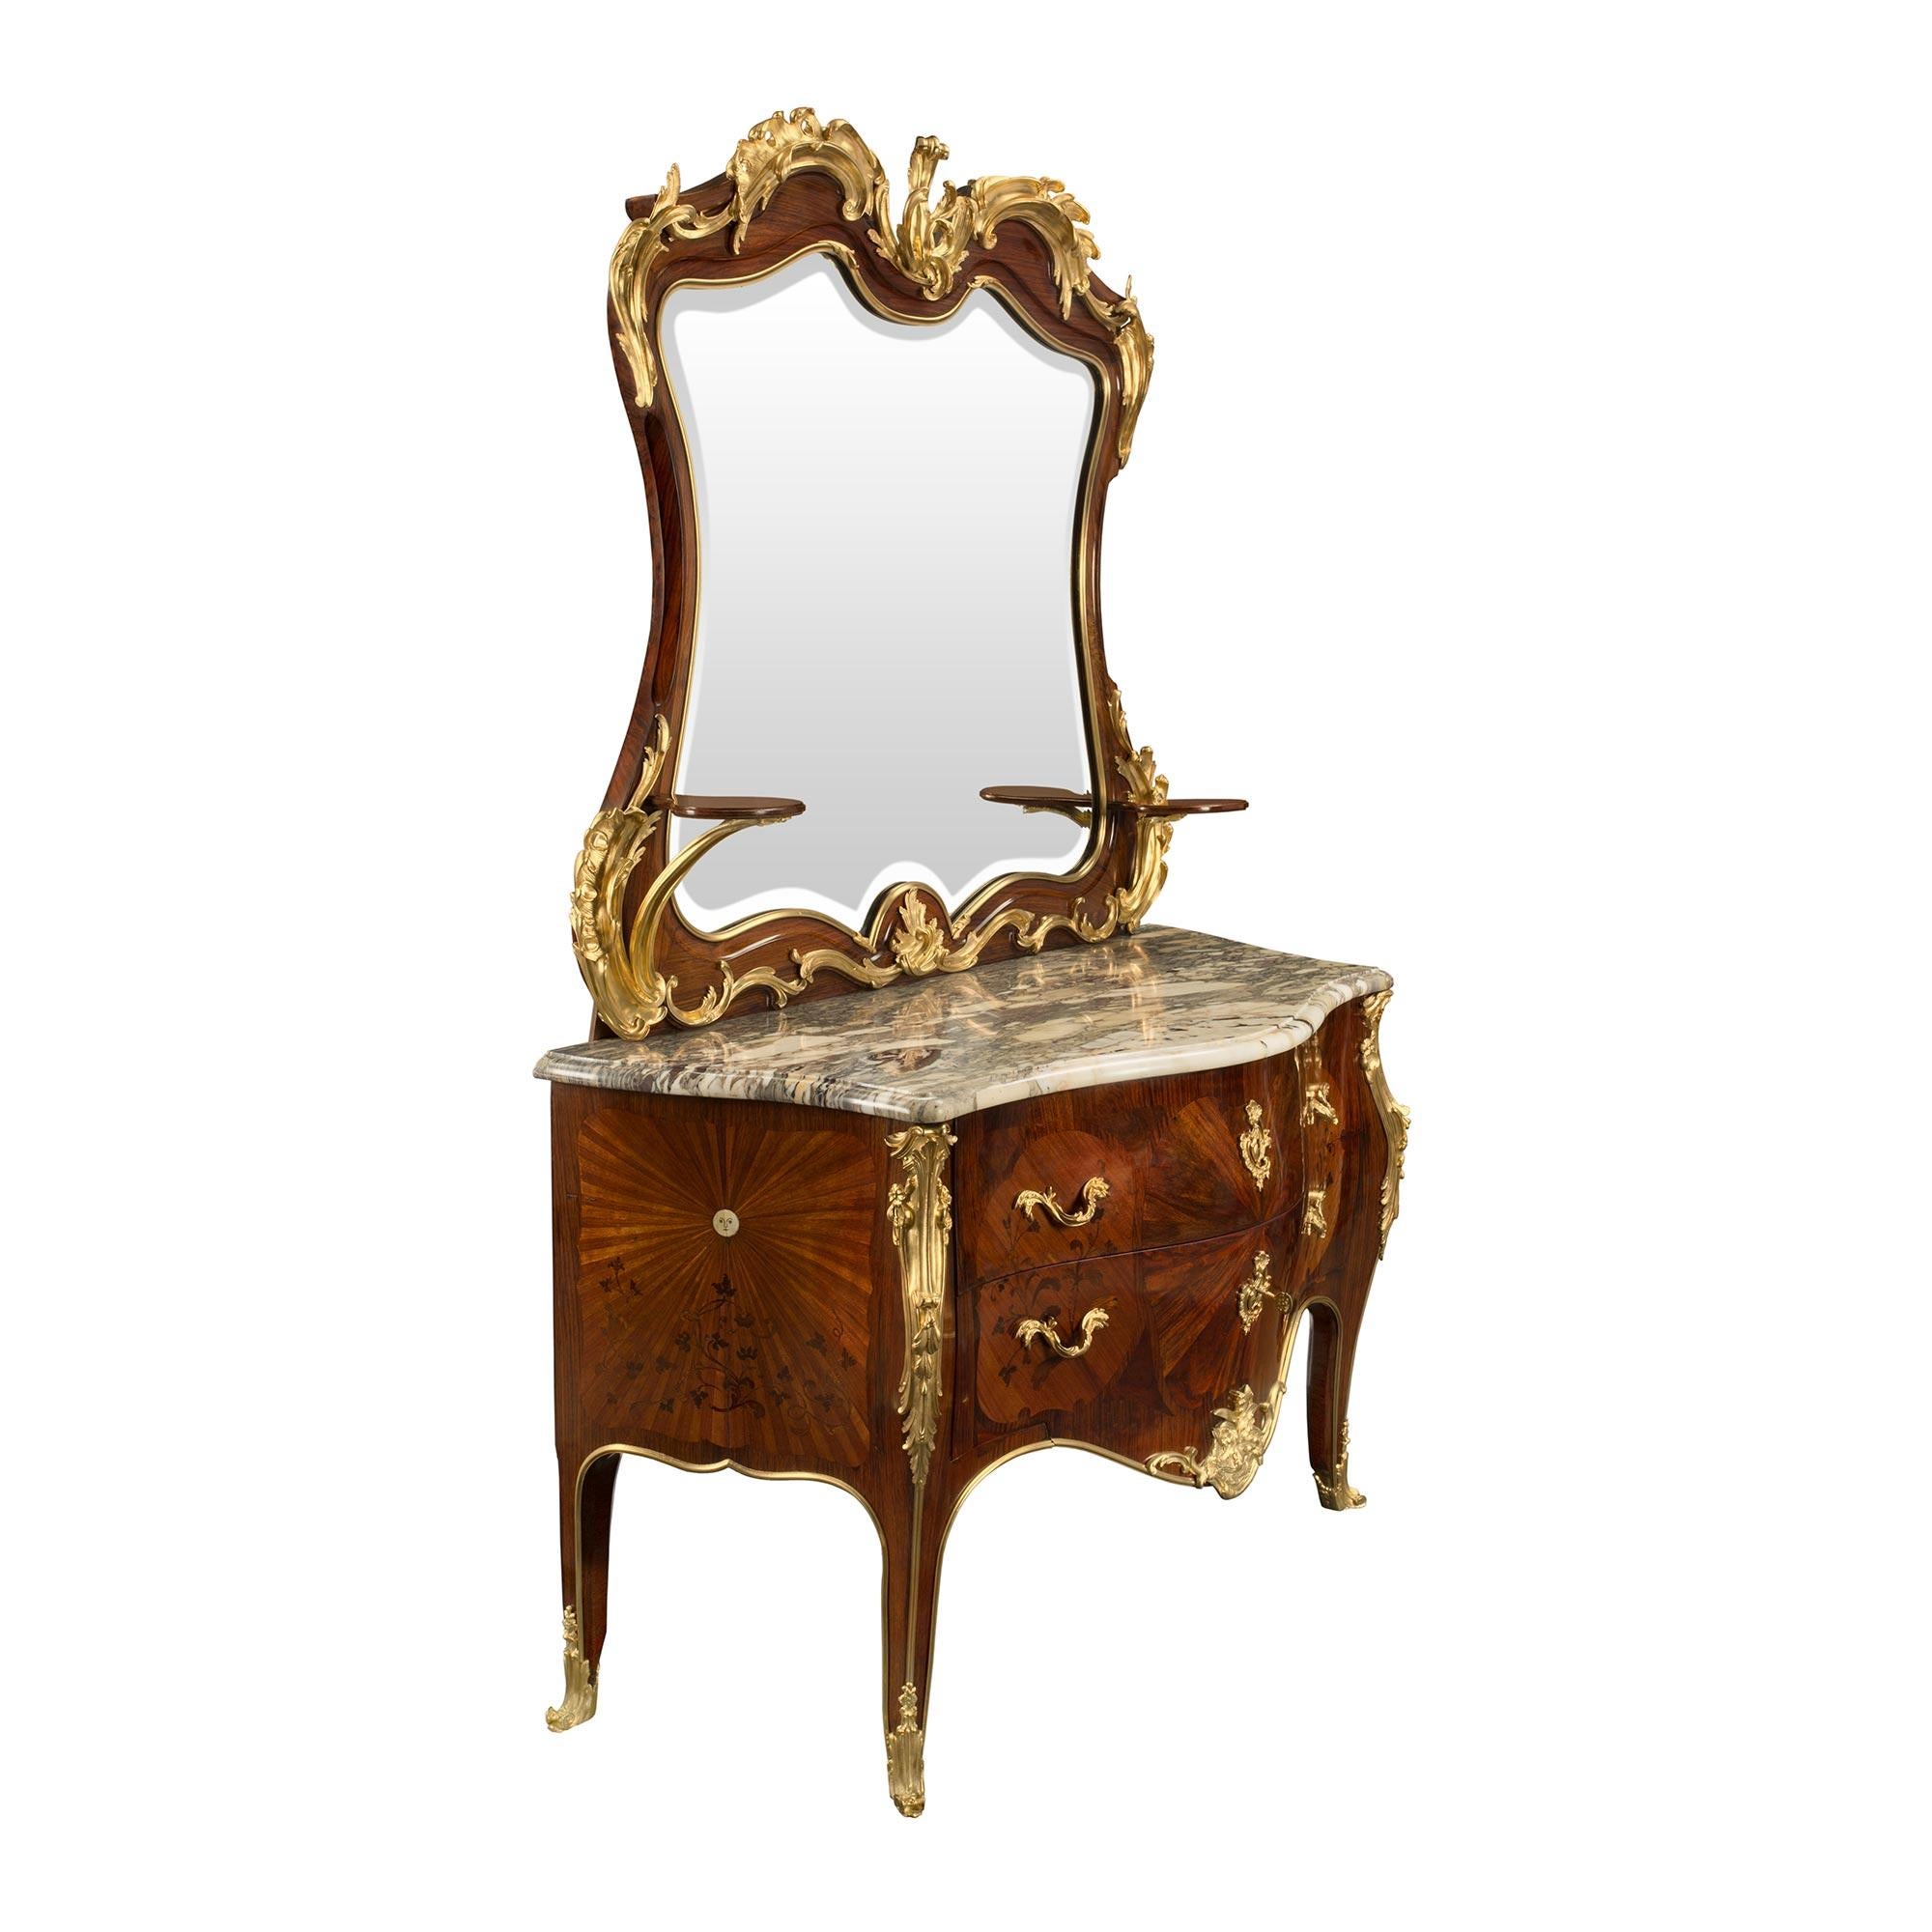 An extremely high quality French 19th century Louis XV style kingwood chest with its original matching mirror, attributed to Krieger. The impressive chest is raised by elegant cabriole legs with foliate wrap around ormolu sabots and an ormolu chute